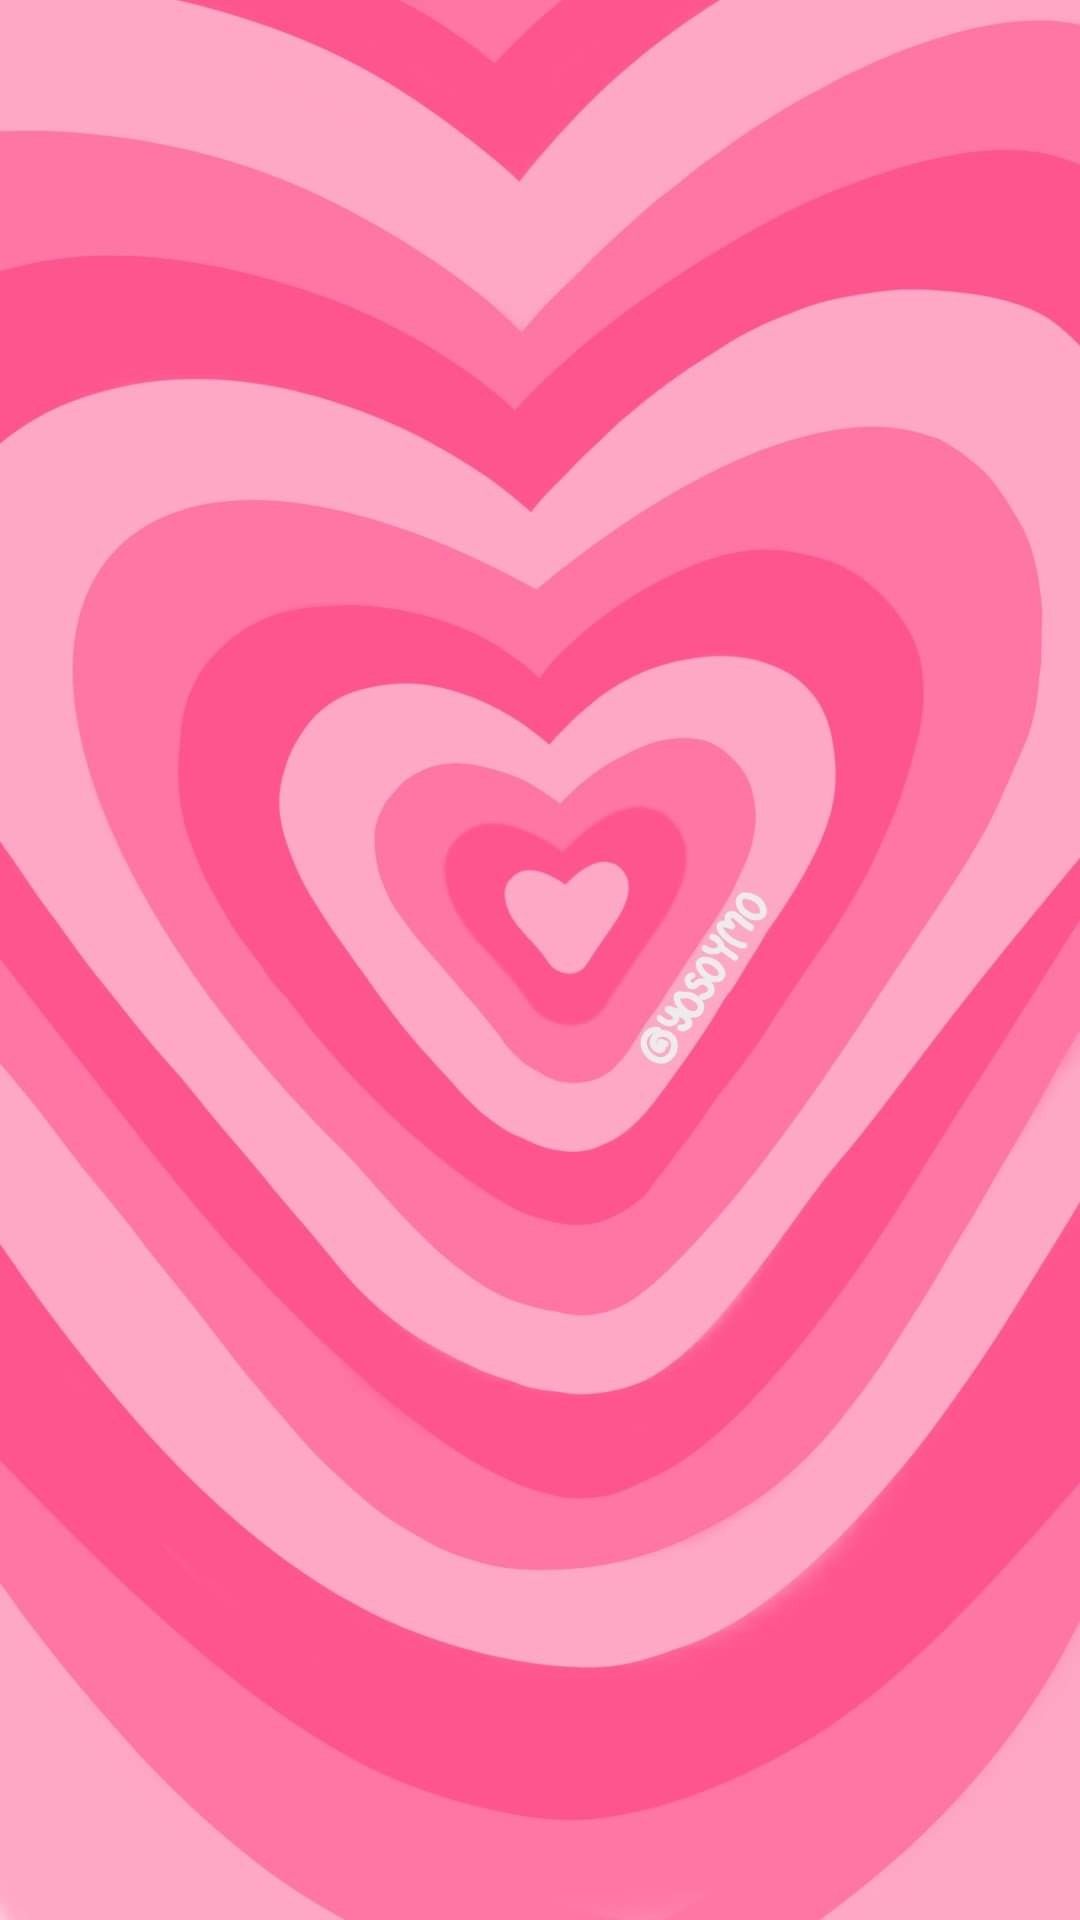 Pink heart wallpaper you can download for free on the website! - Pink heart